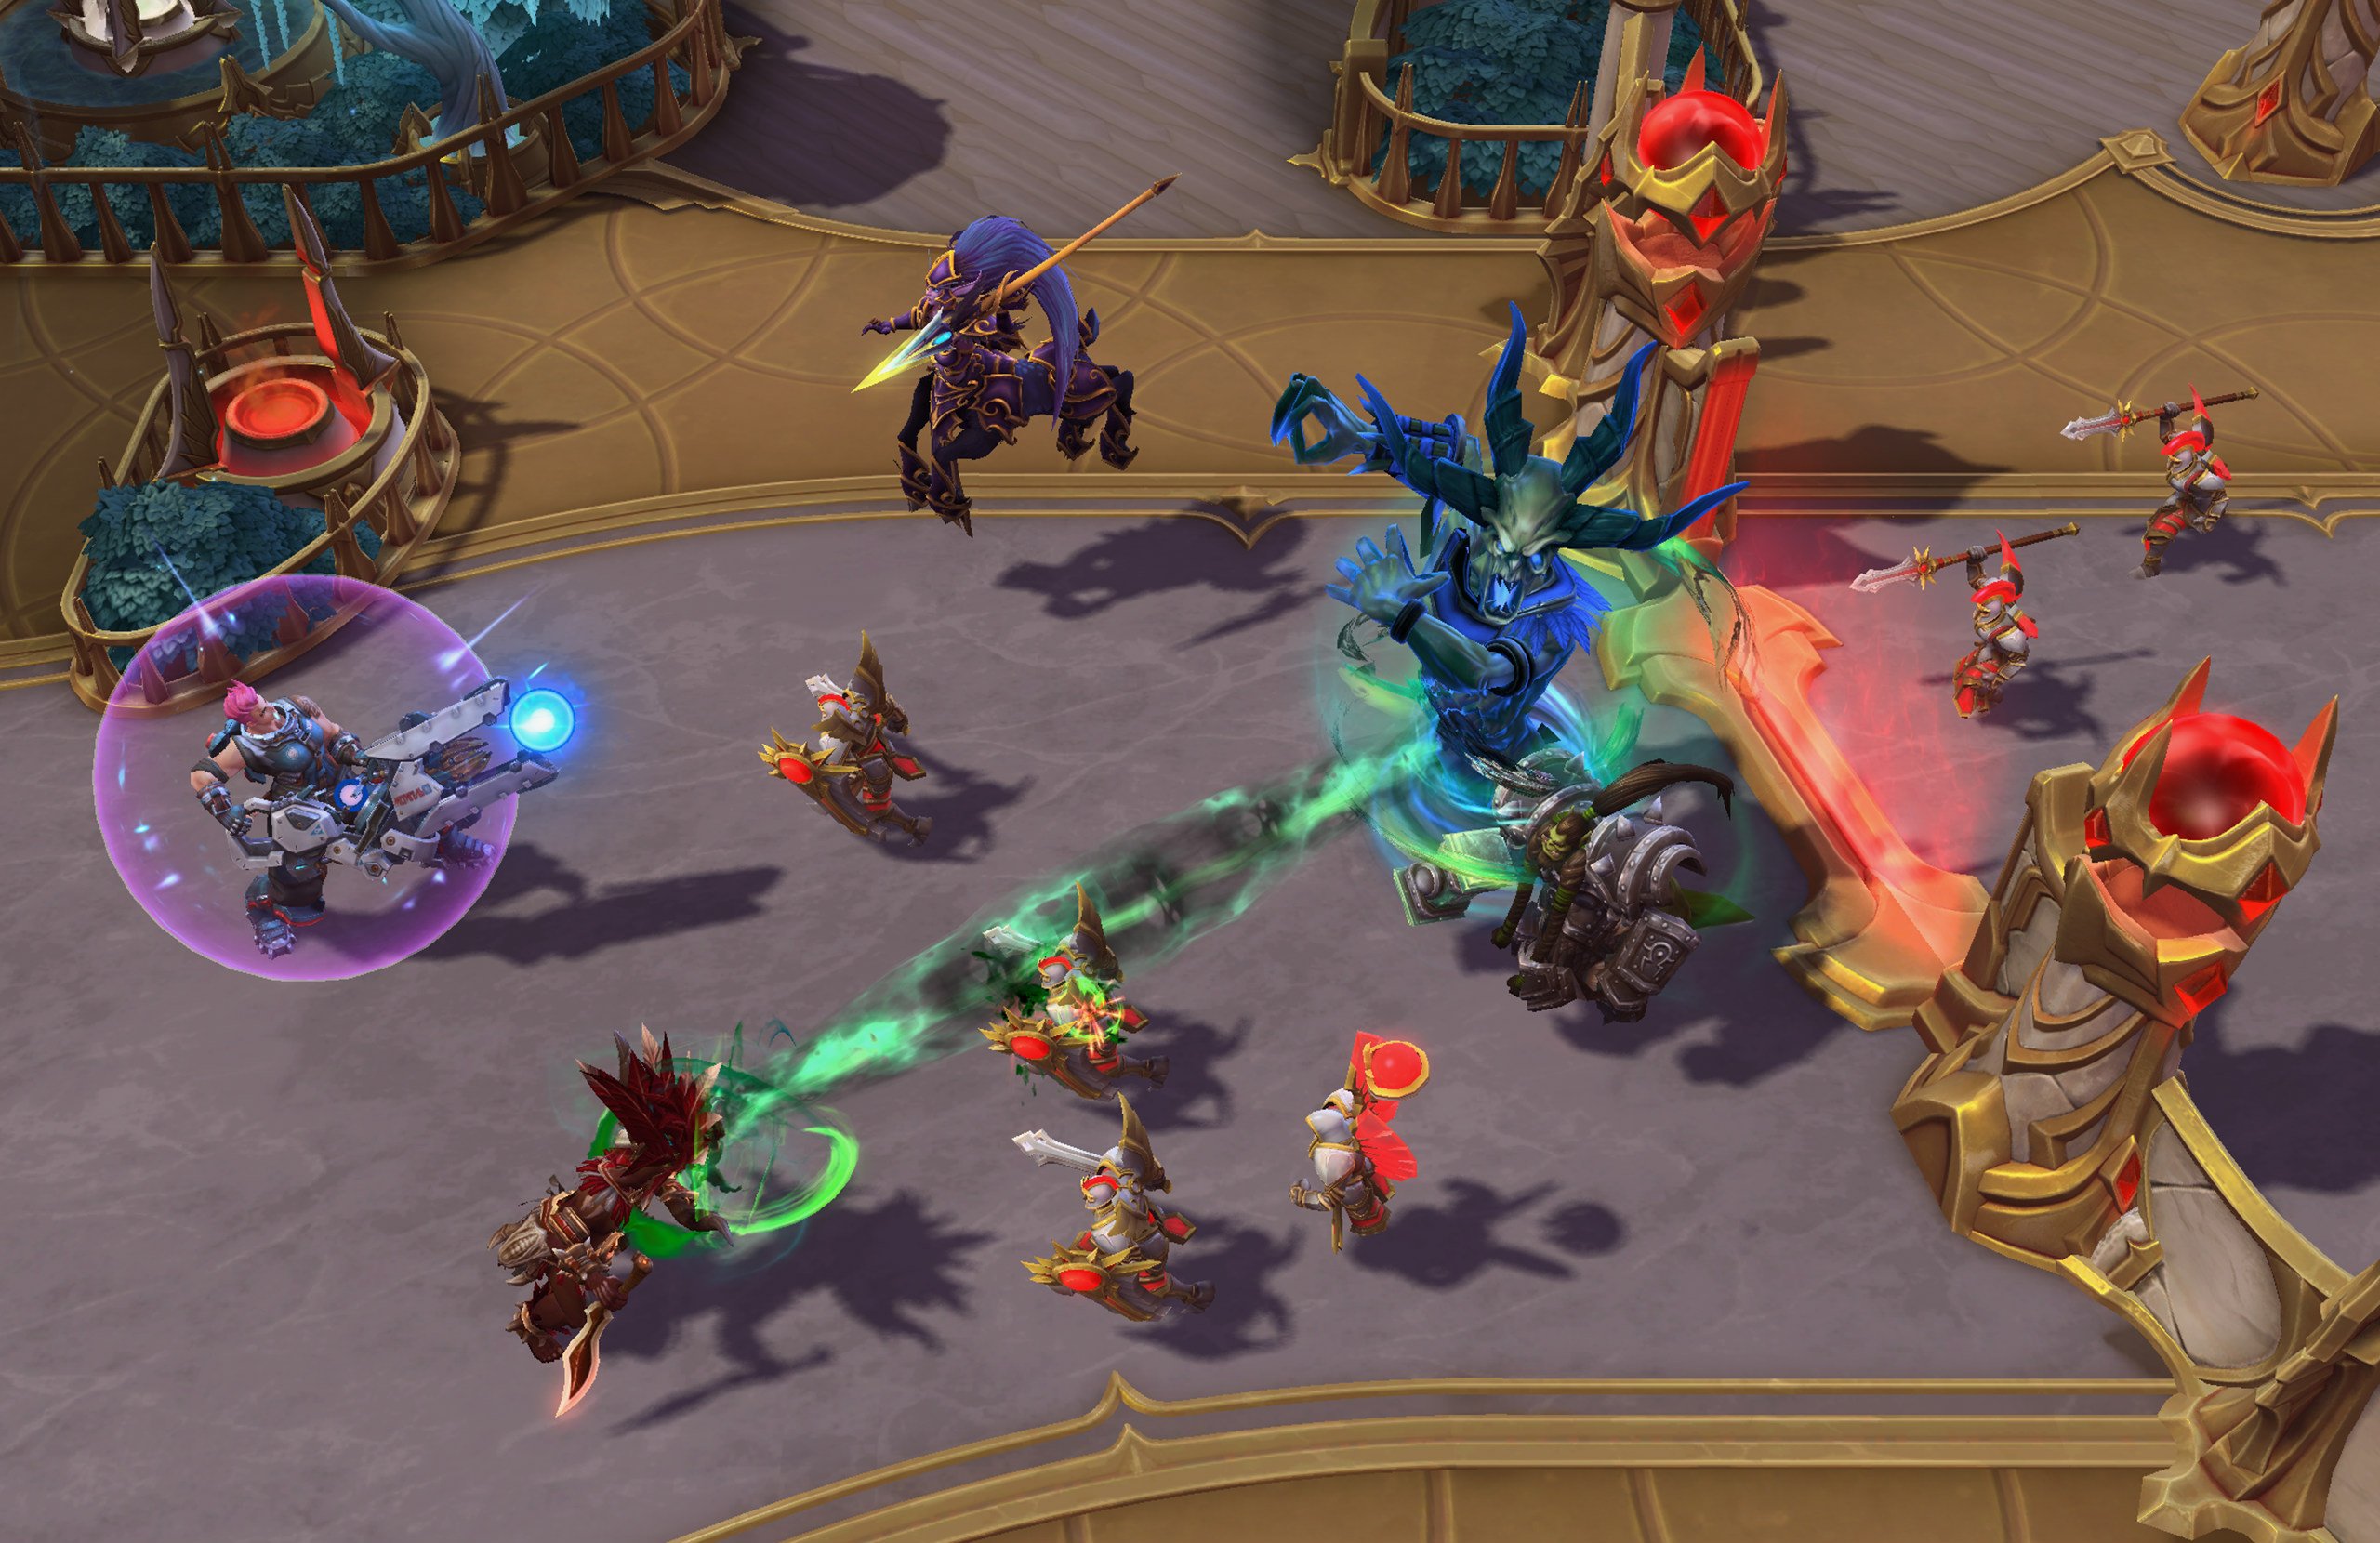 Heroes of the Storm is getting a new hero and ranked queue system